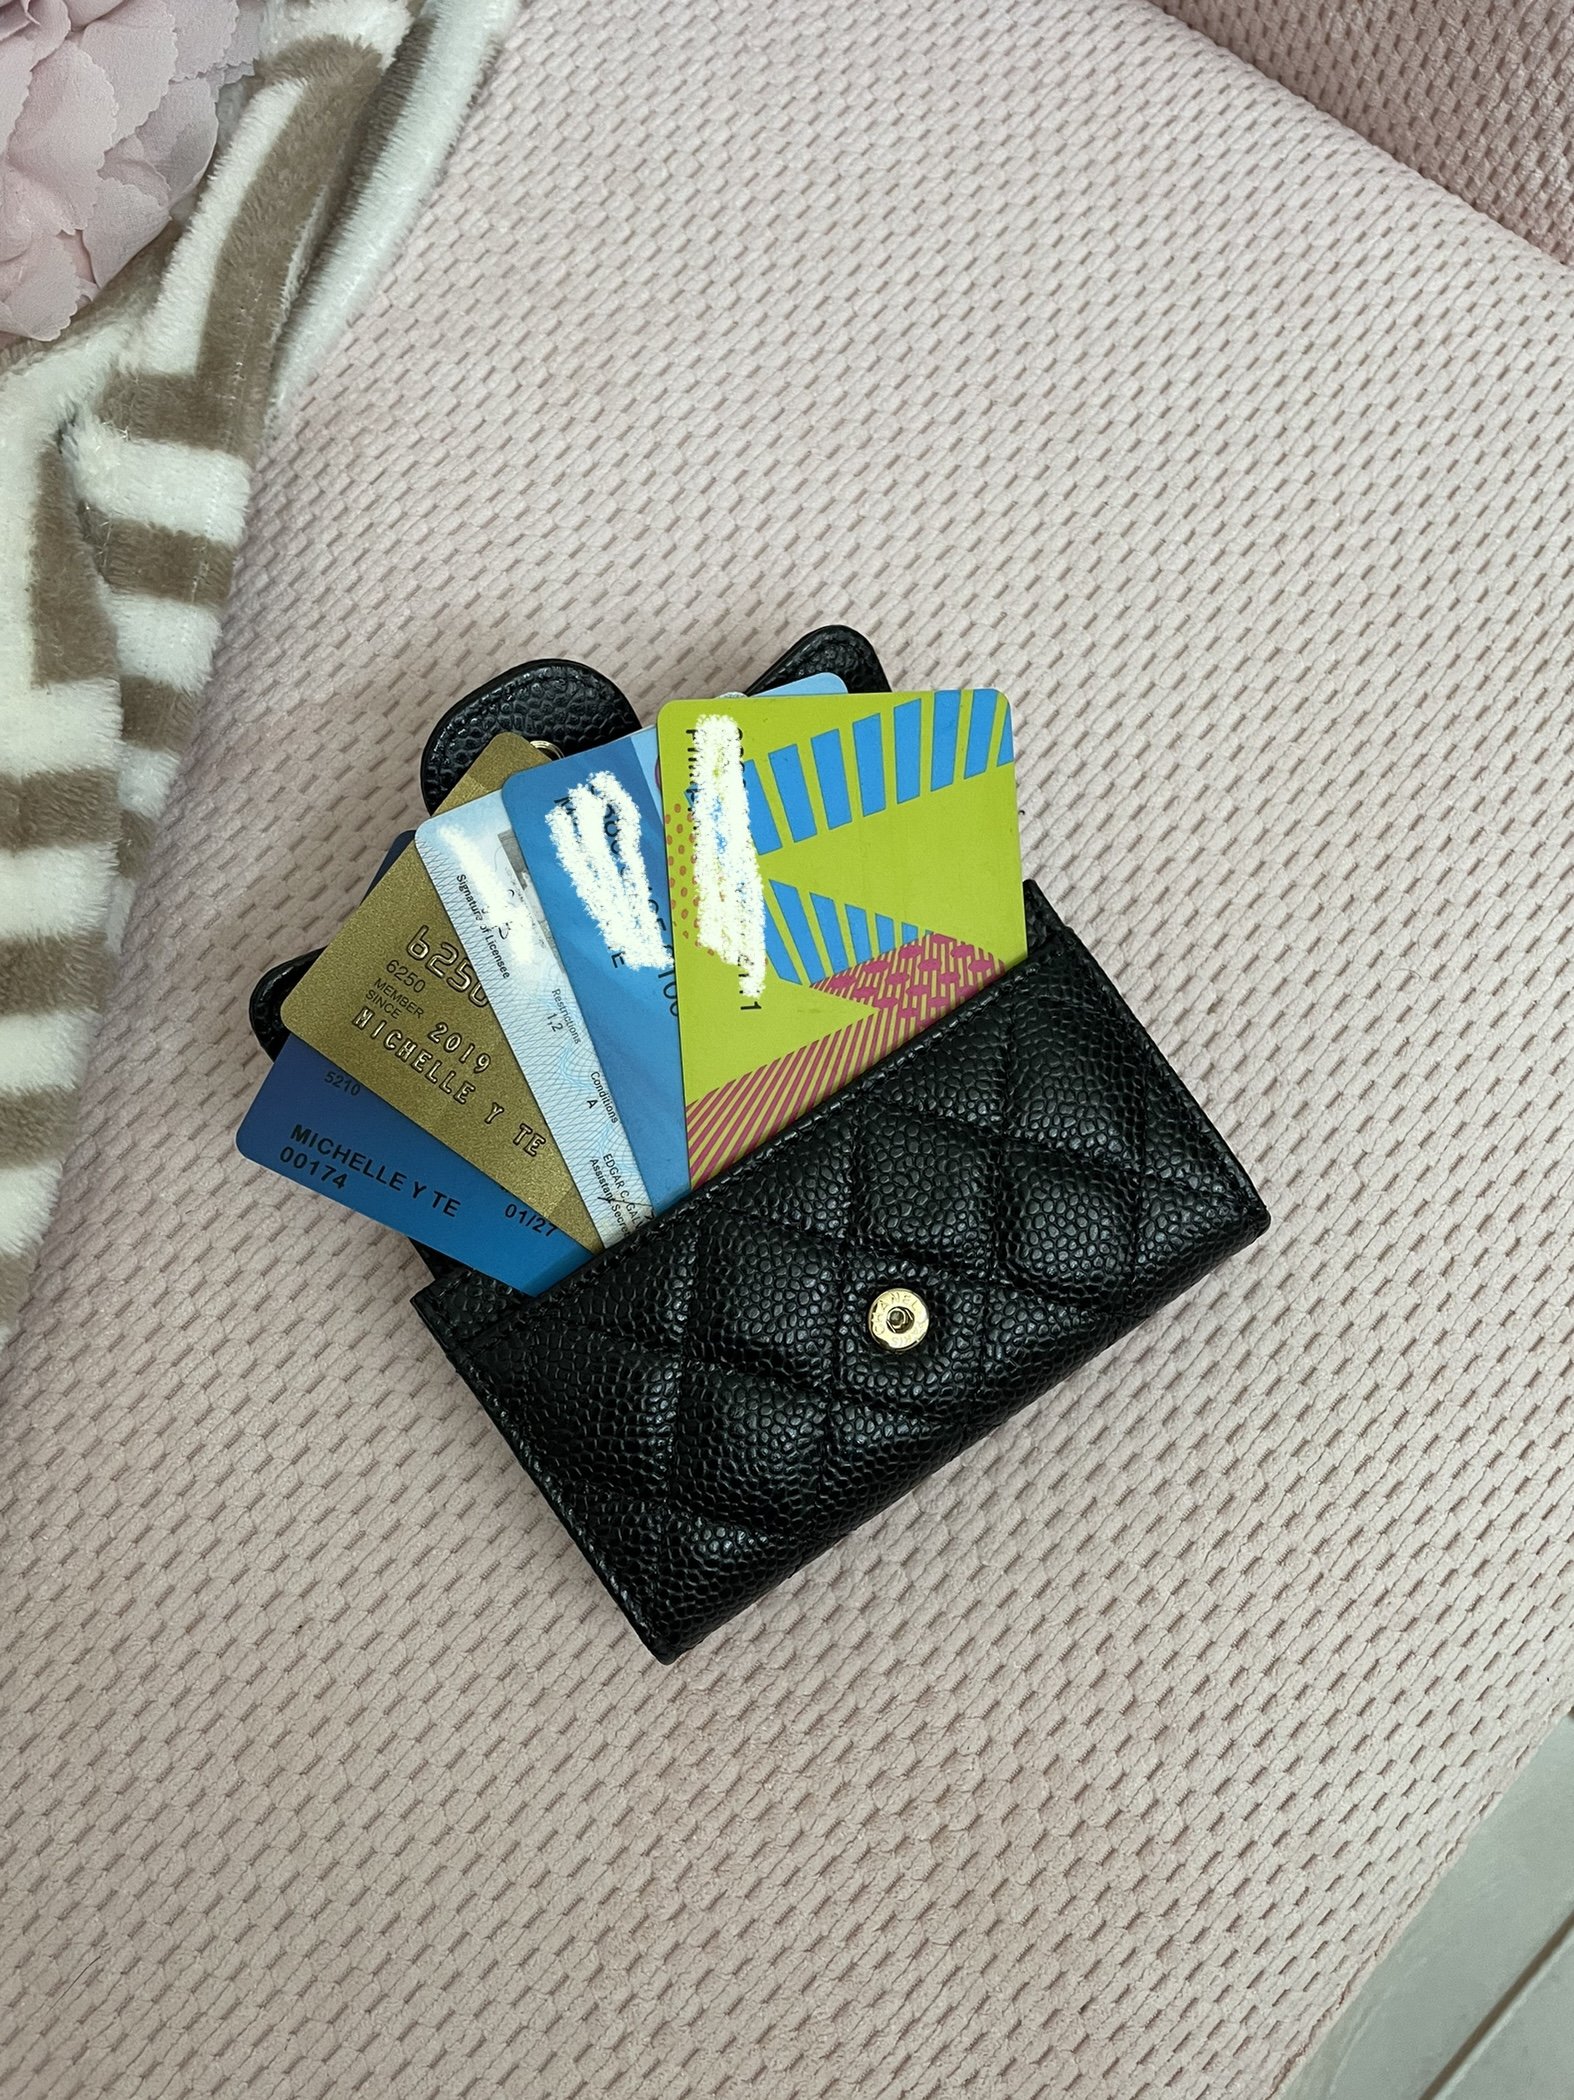 Chanel 21K XL Card Holder Review